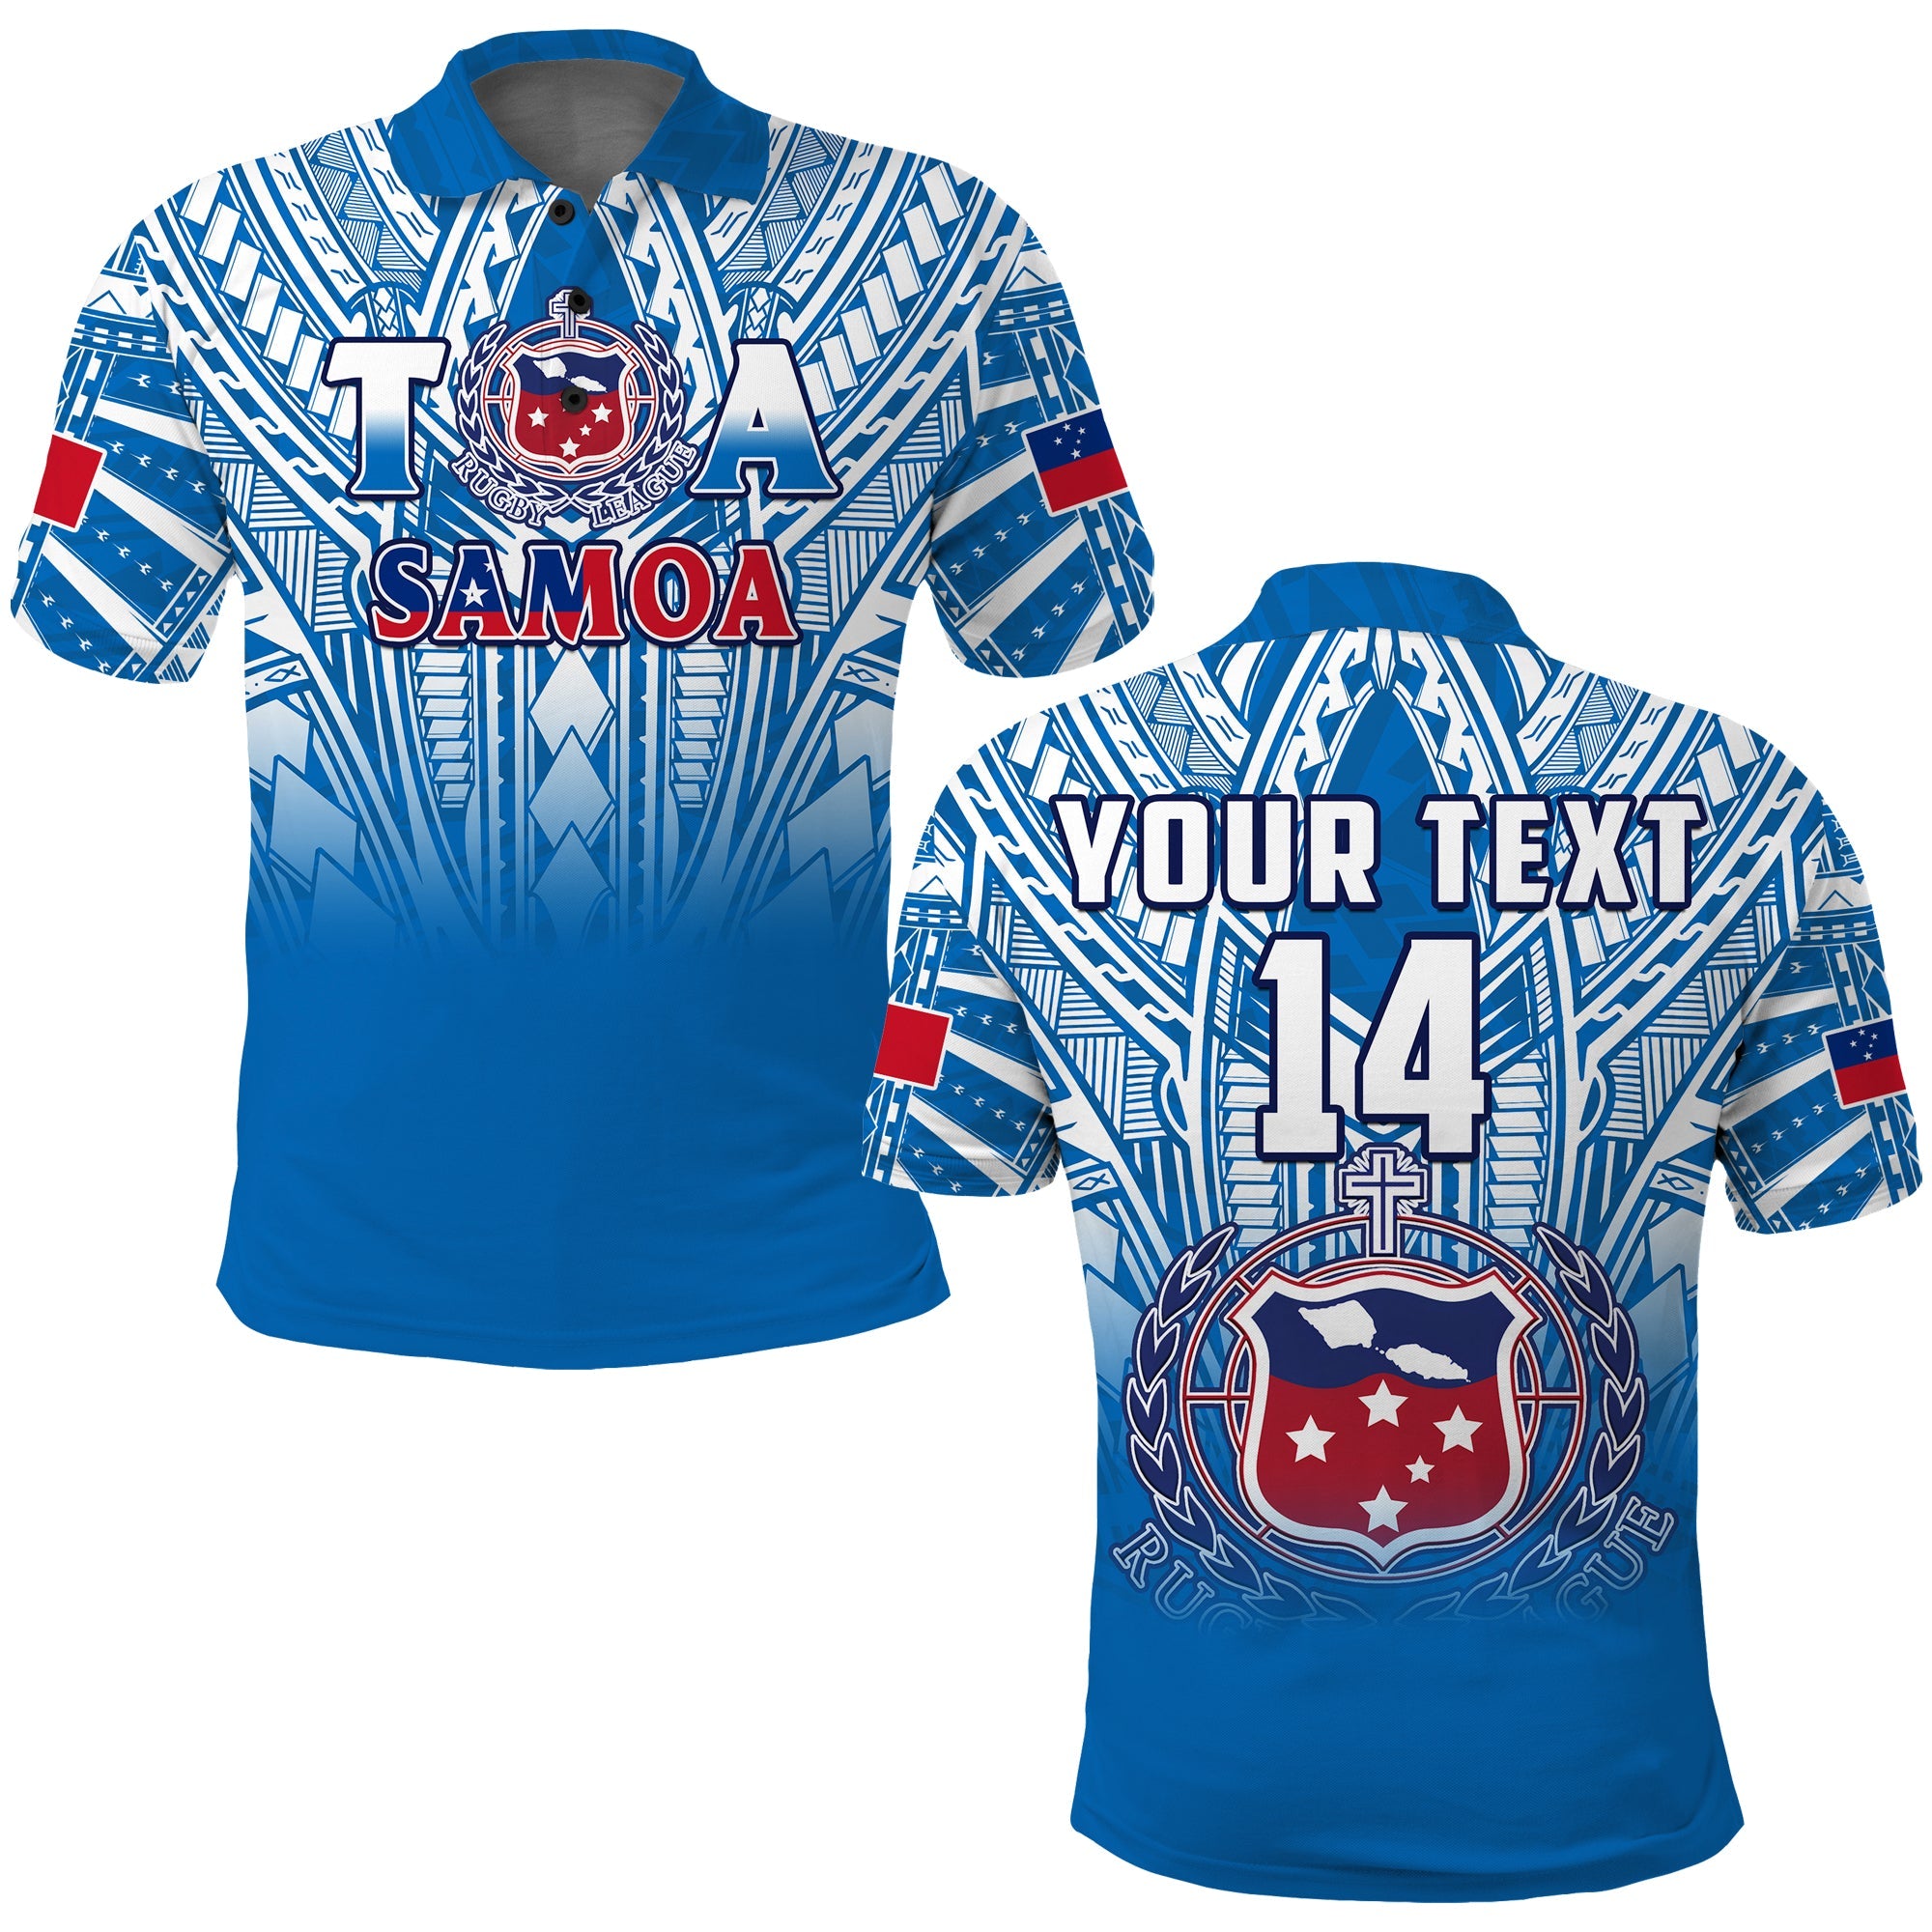 (Custom Text and Number) Samoa Rugby Polo Shirt Personalise Toa Samoa Polynesian Pacific Blue Version LT14 Blue - Polynesian Pride